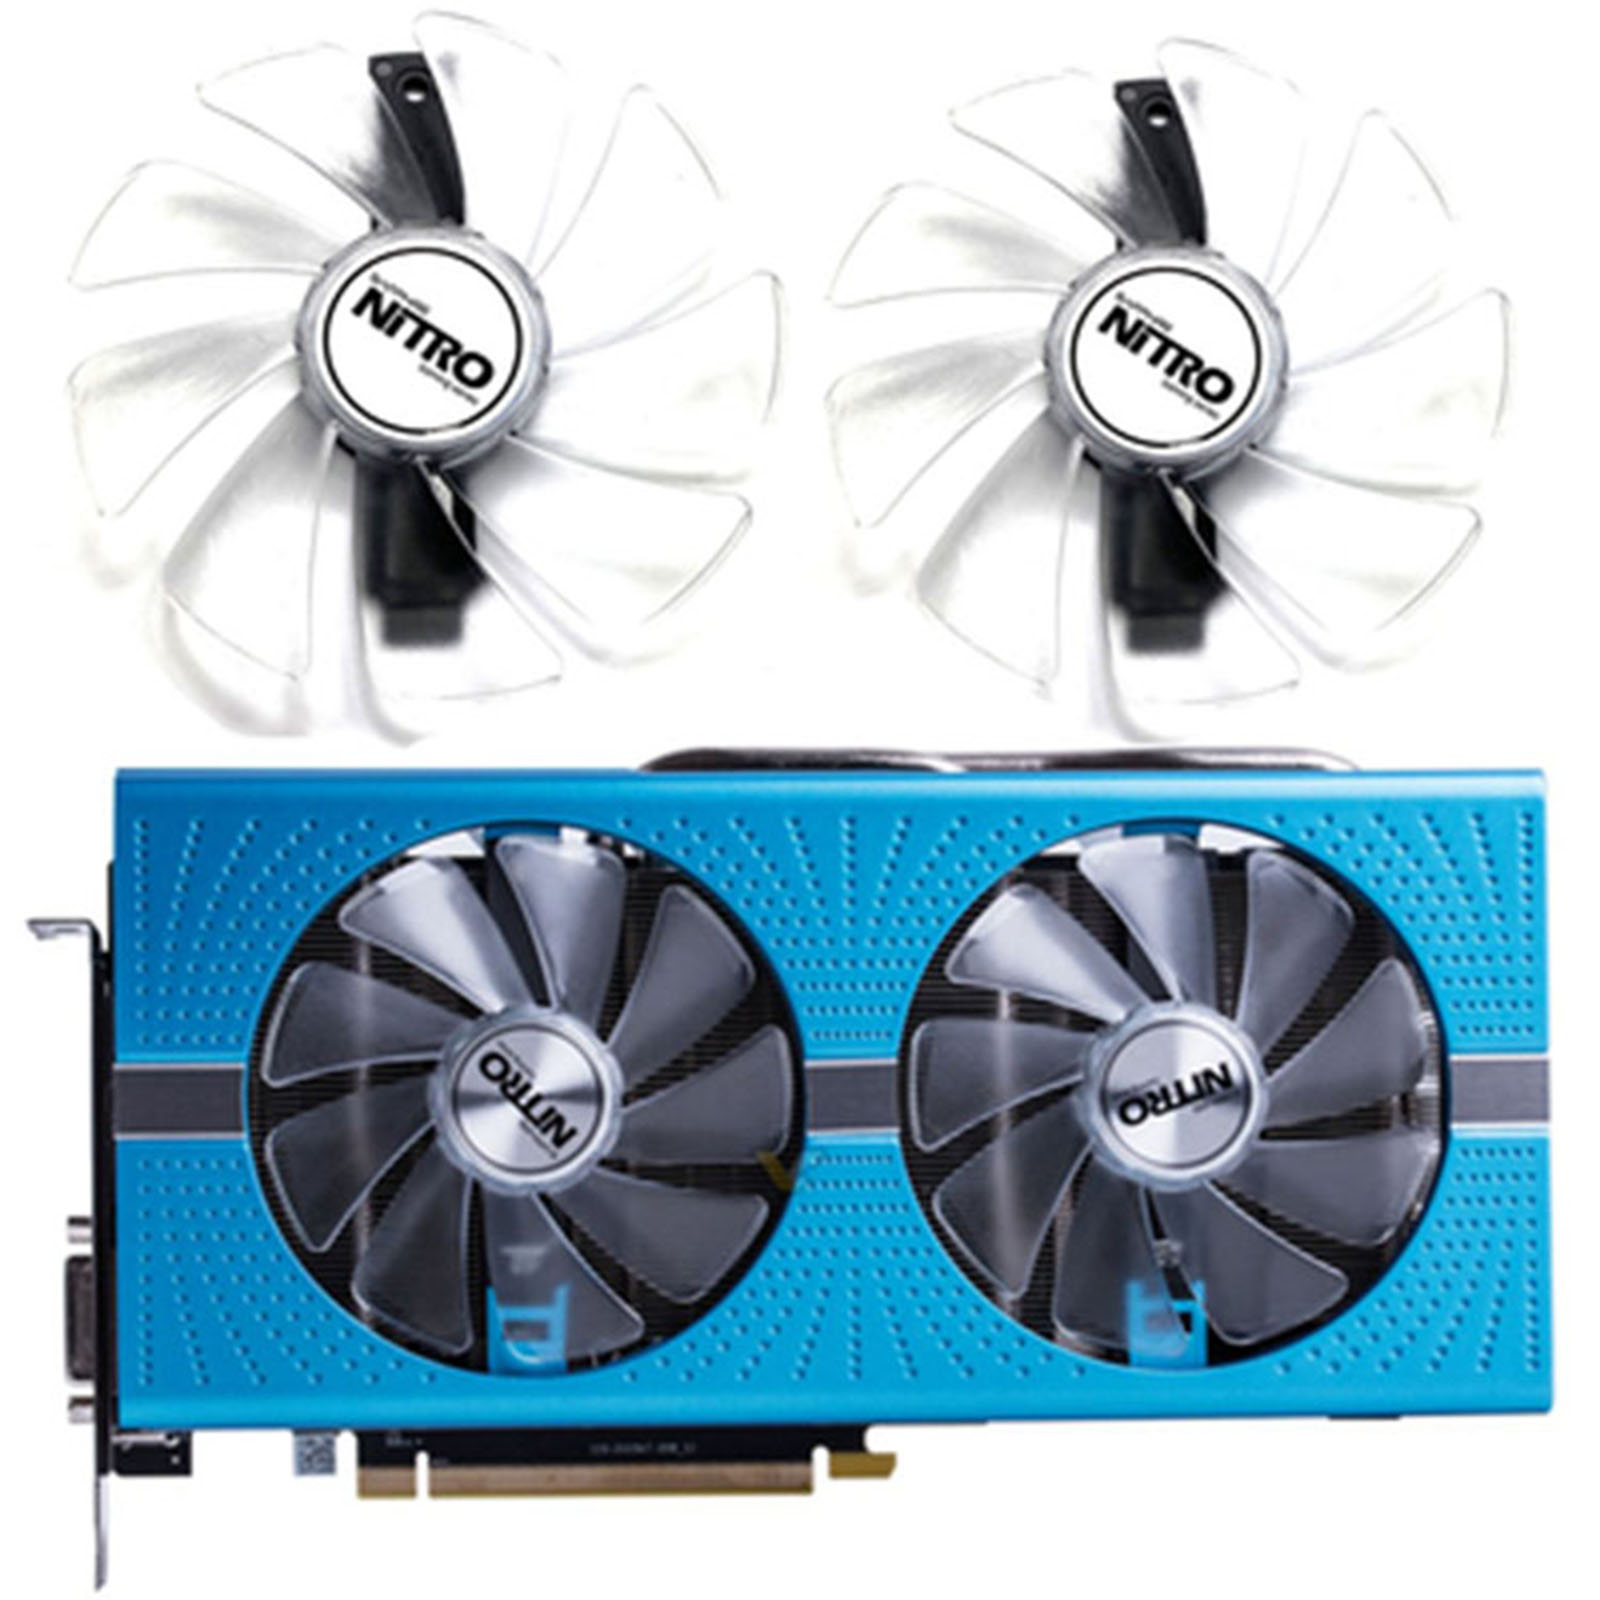 Cooling Fans for Sapphire RX 580 570 480 470 Platinum Ultra Graphics Cards